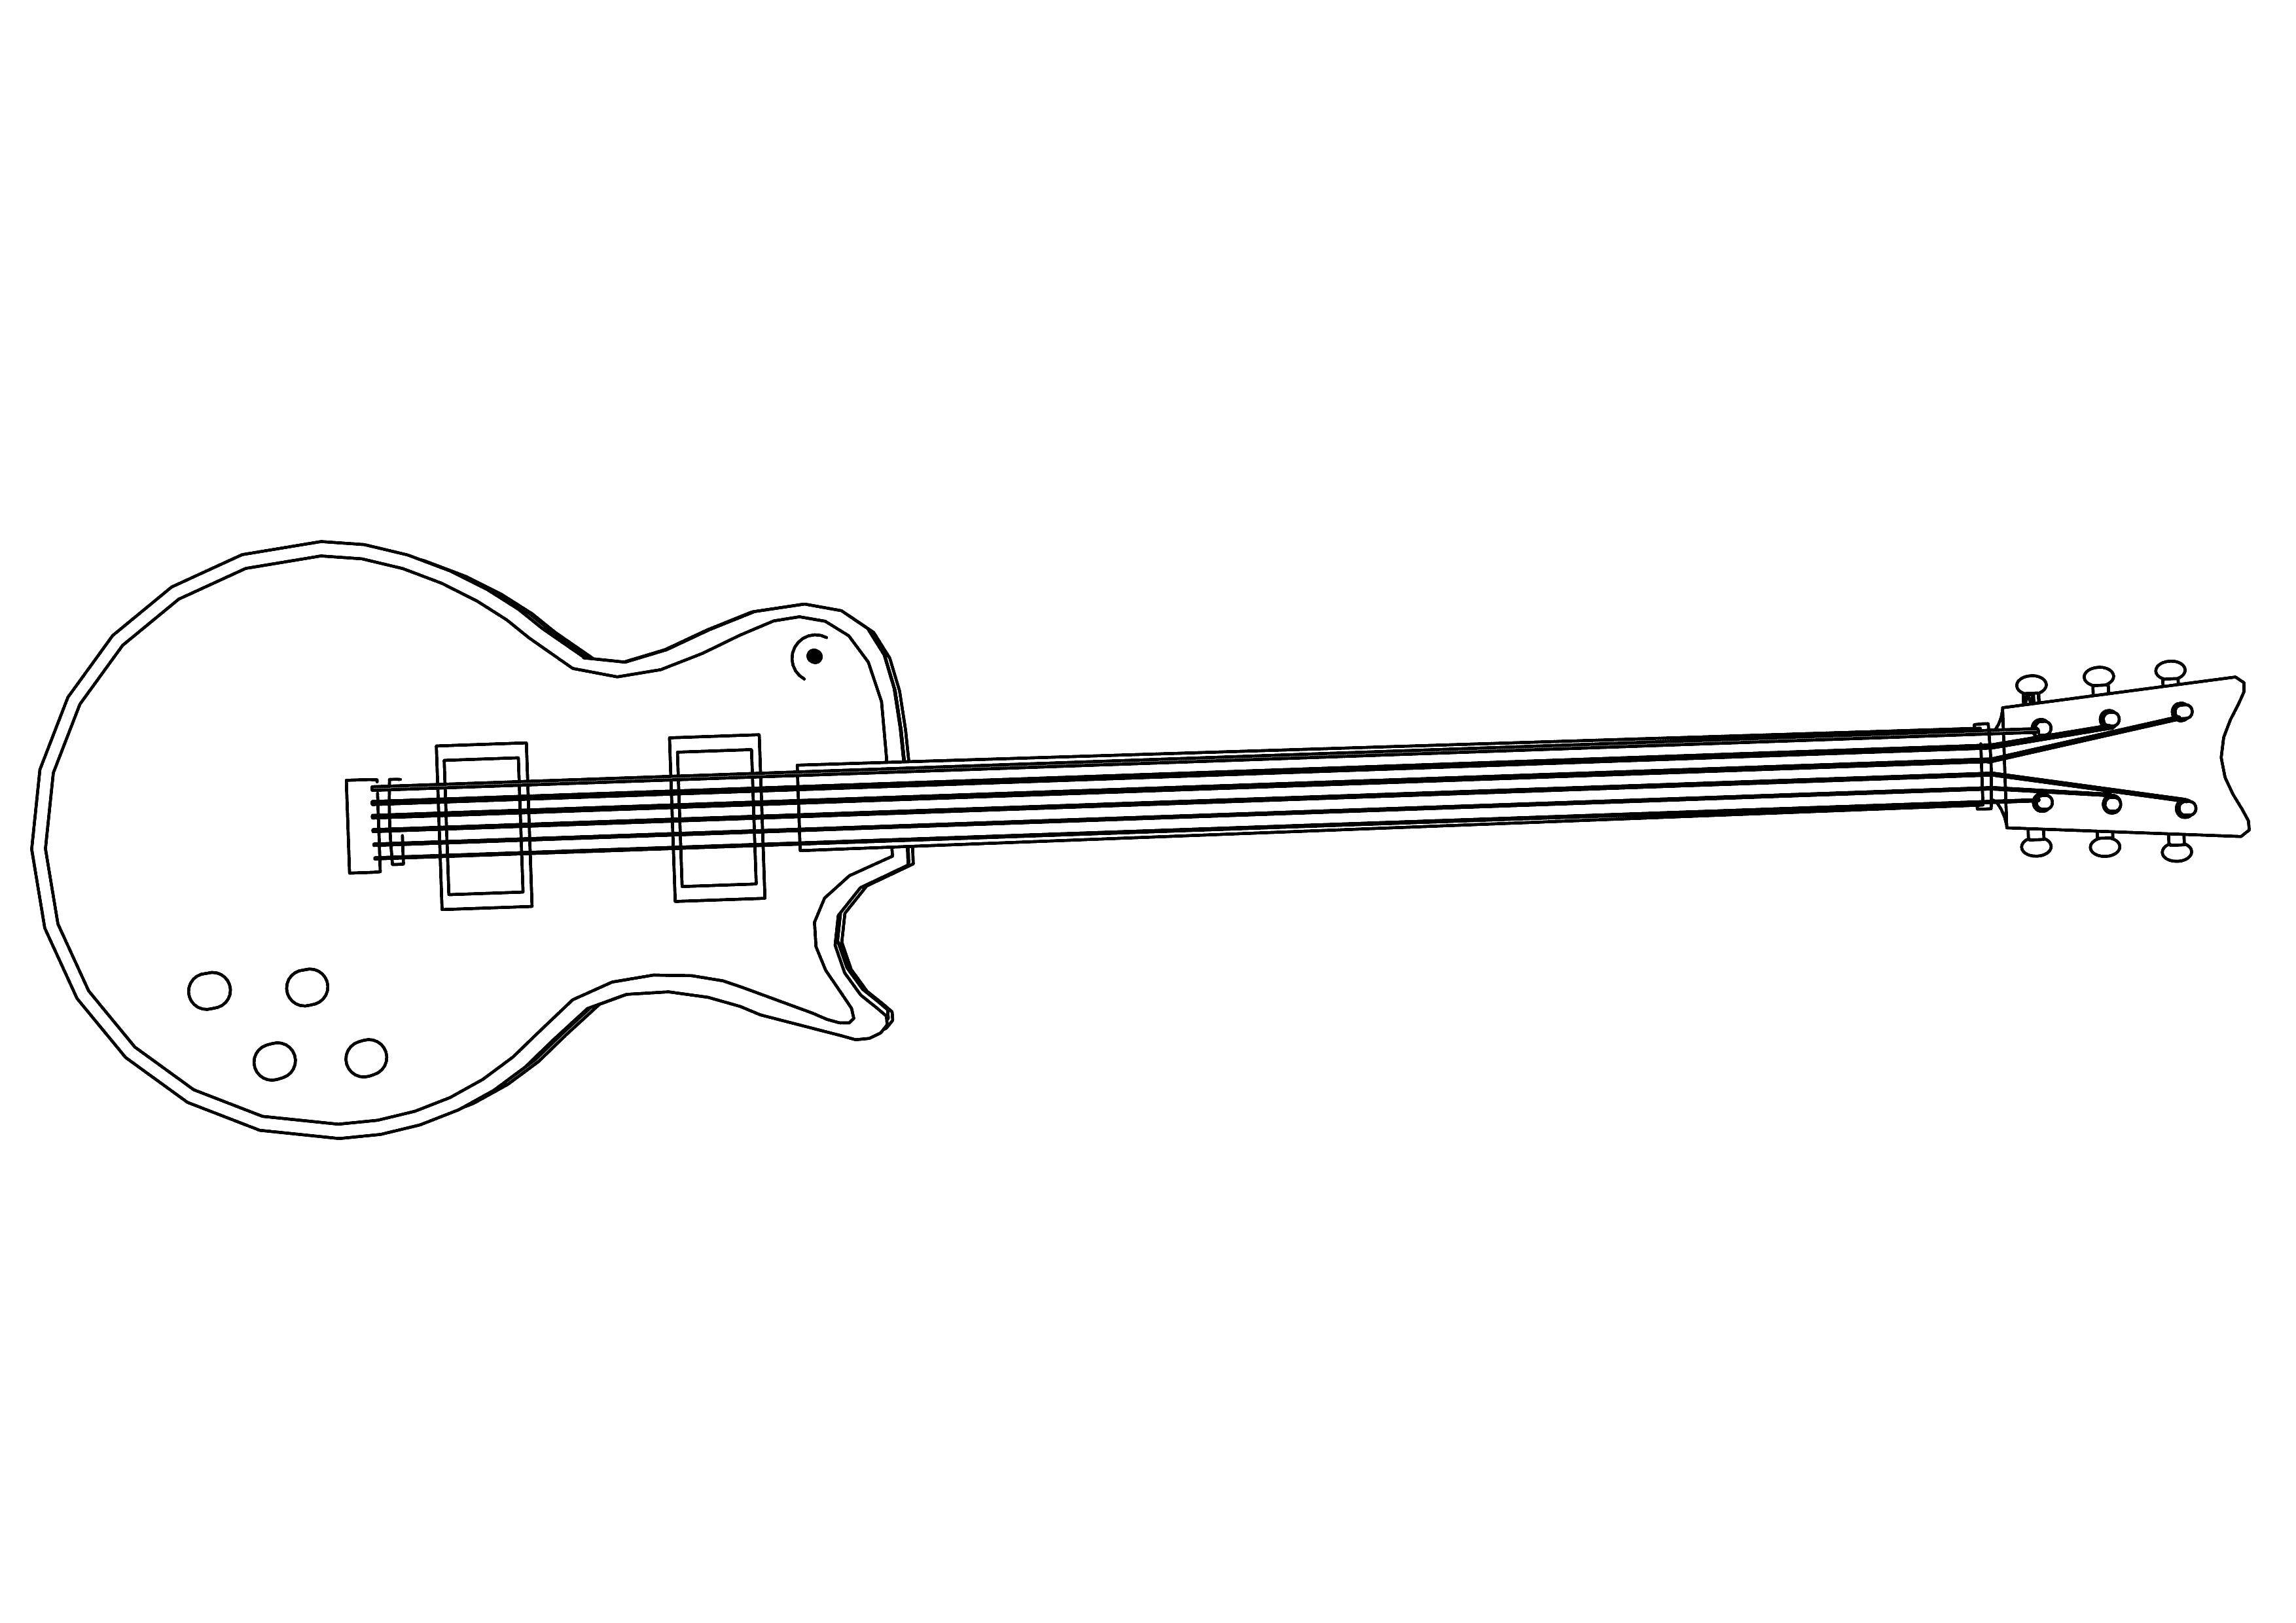 Coloring Electric guitar. Category Electric guitar. Tags:  musical instruments, guitar.